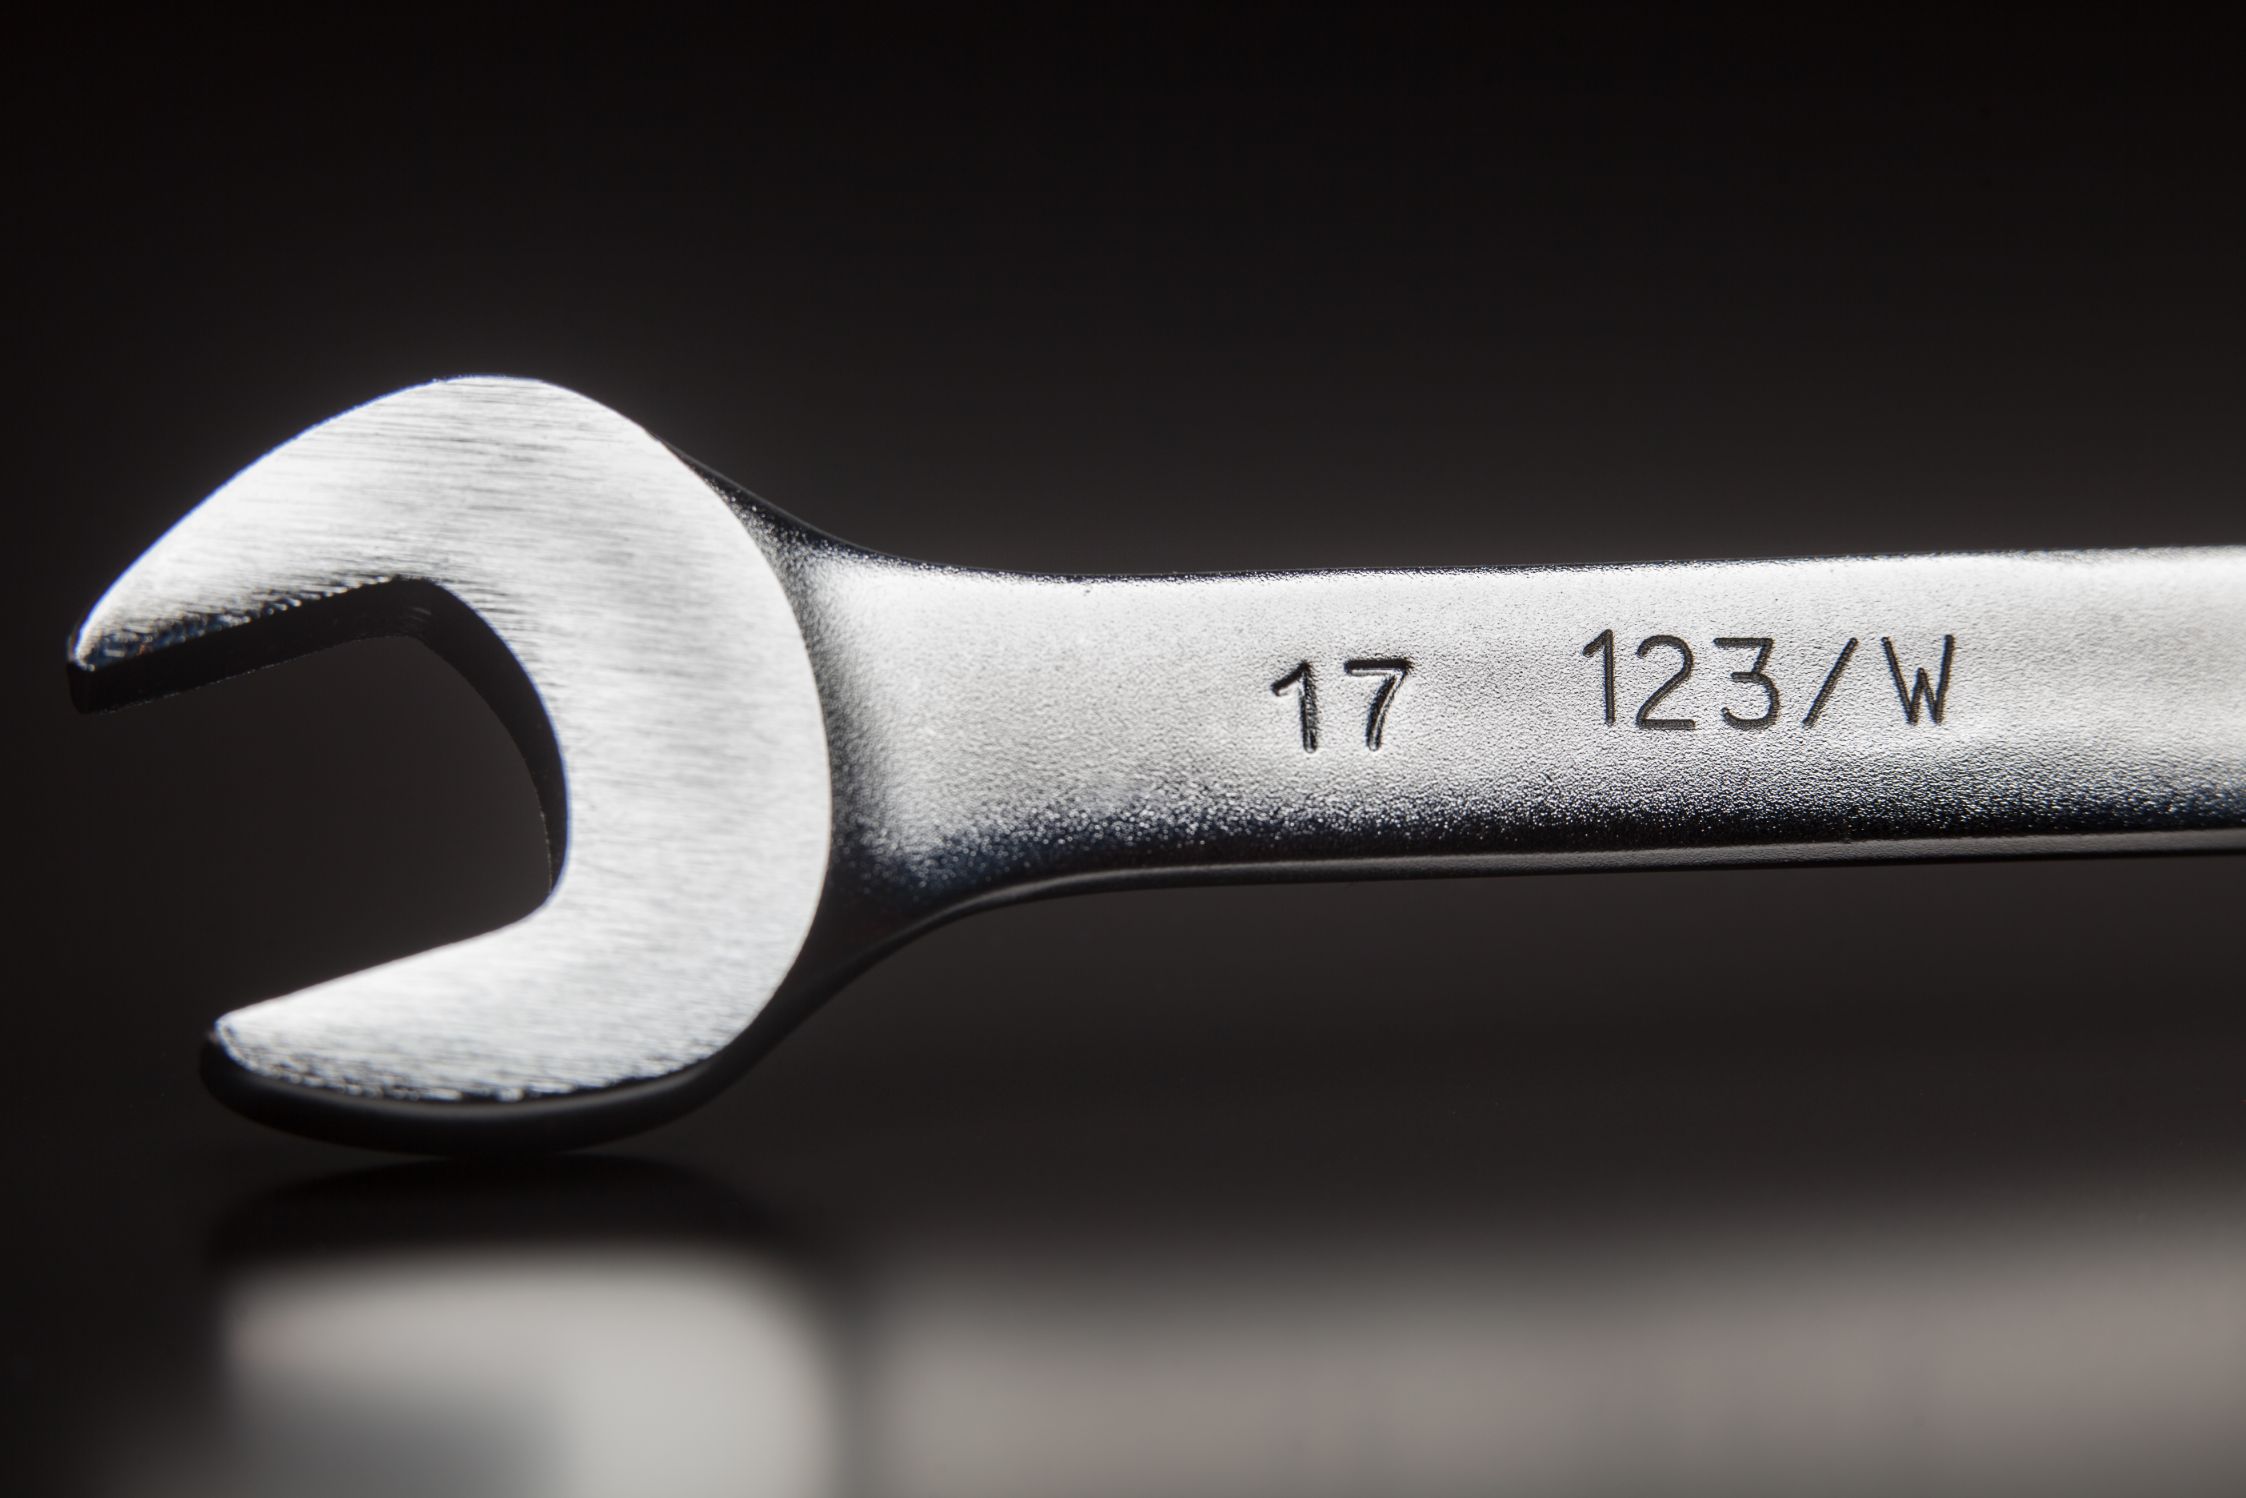 mkt a identification wrench 1